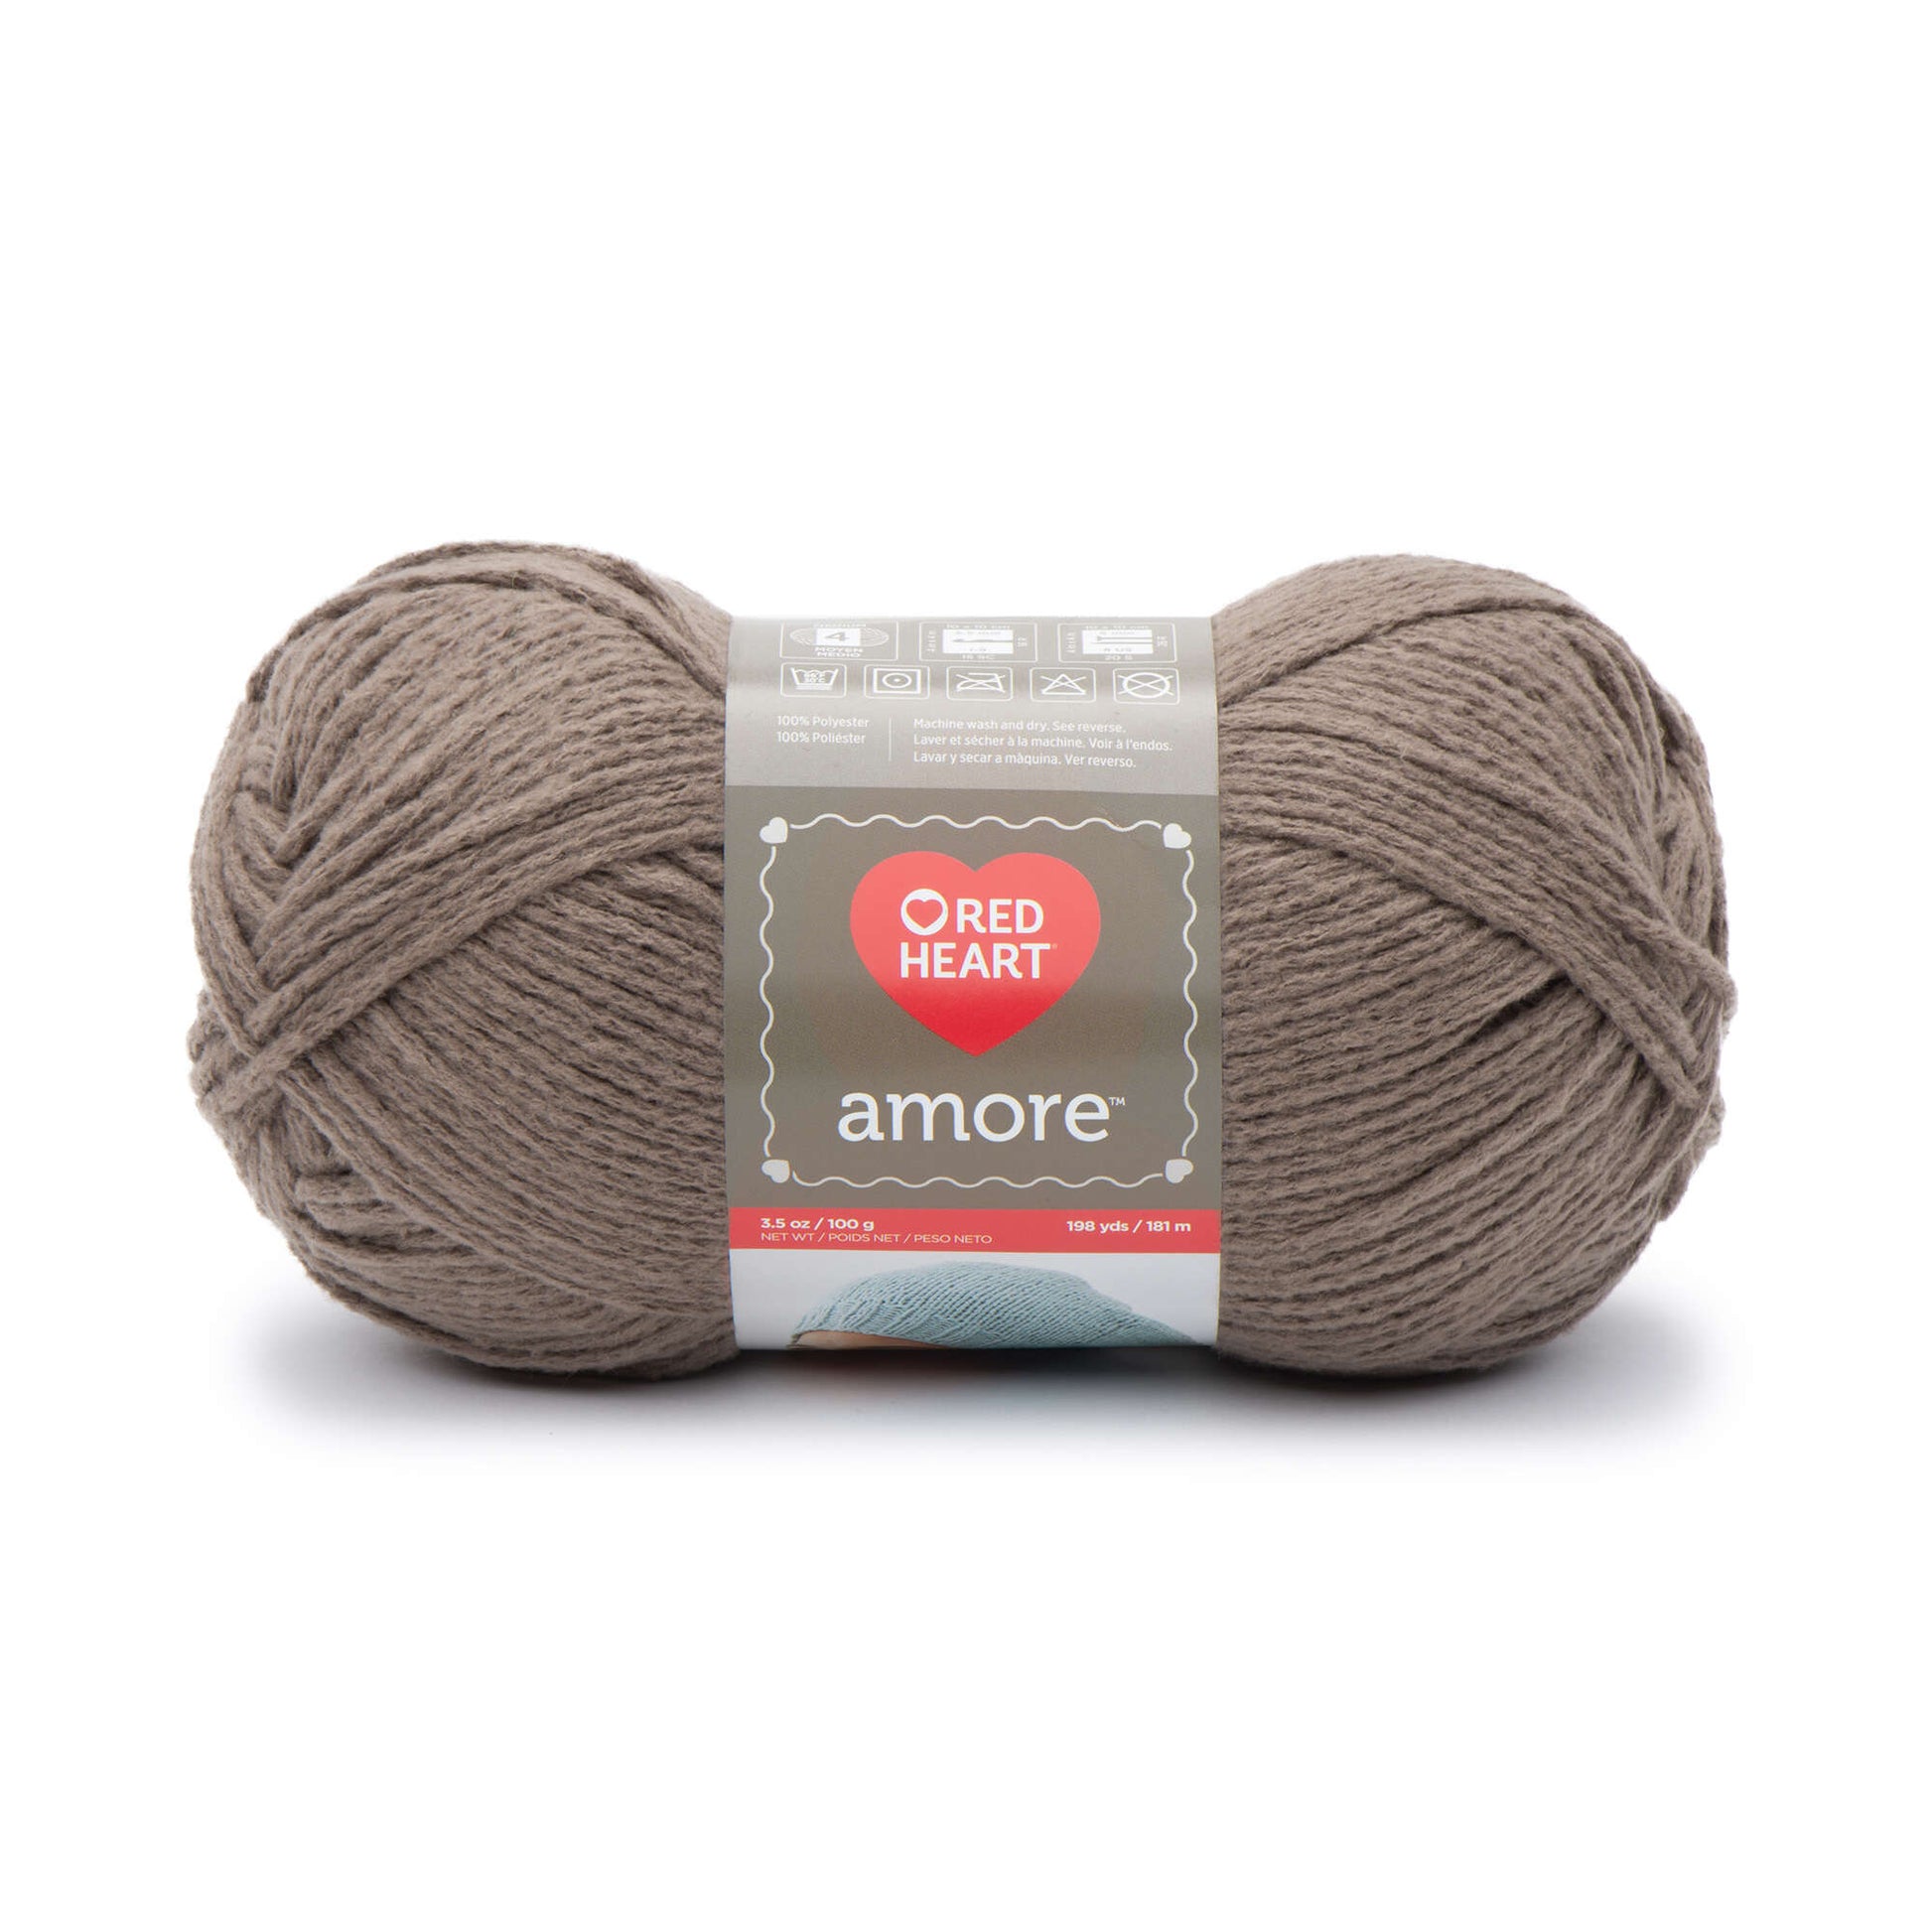 Red Heart Amore Yarn - Discontinued shades Latte